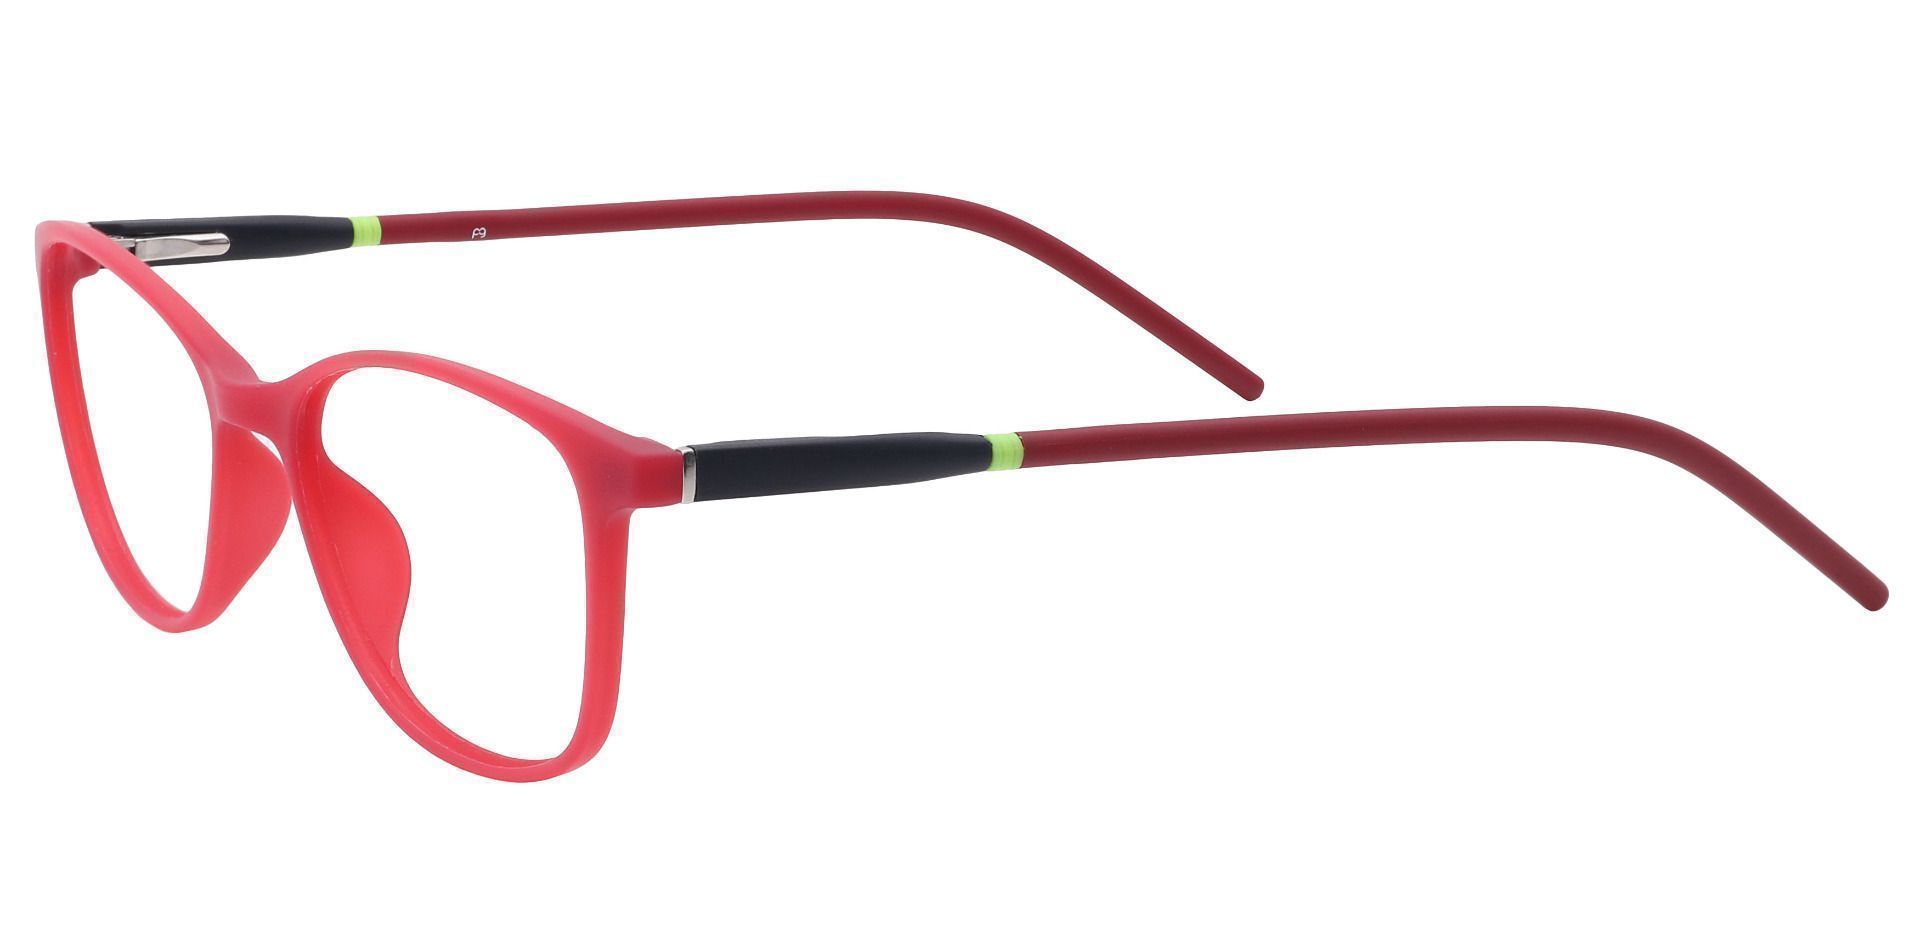 Hazel Square Lined Bifocal Glasses - Cherry Red/blk & Red Temple